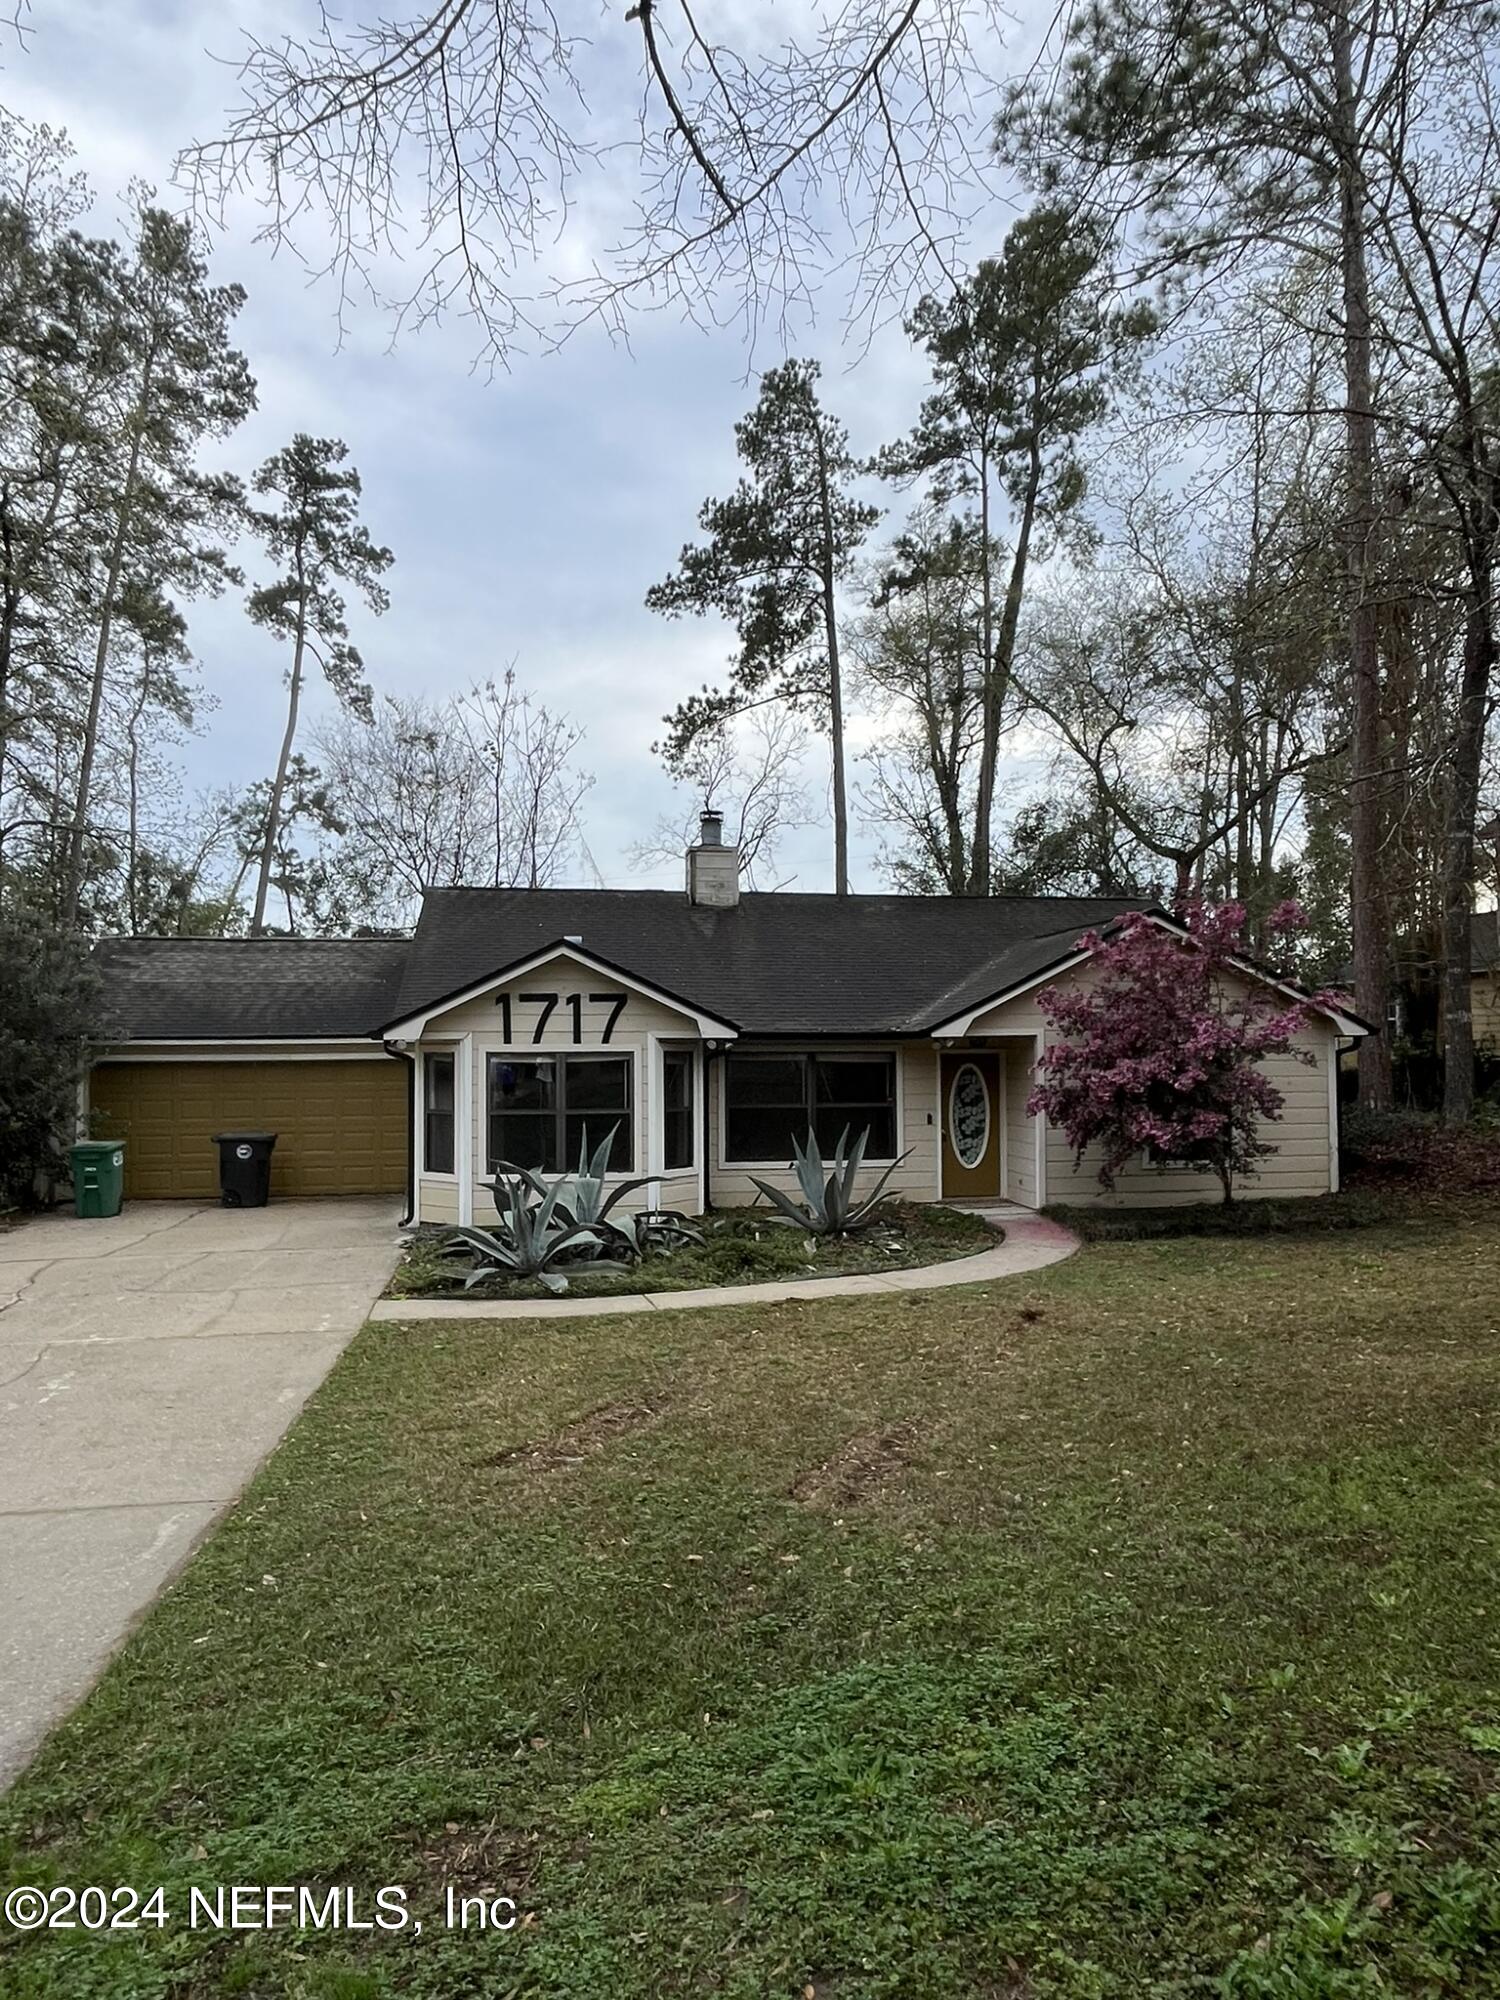 Tallahassee, FL home for sale located at 1717 INDIAN TOWN Lane, Tallahassee, FL 32312